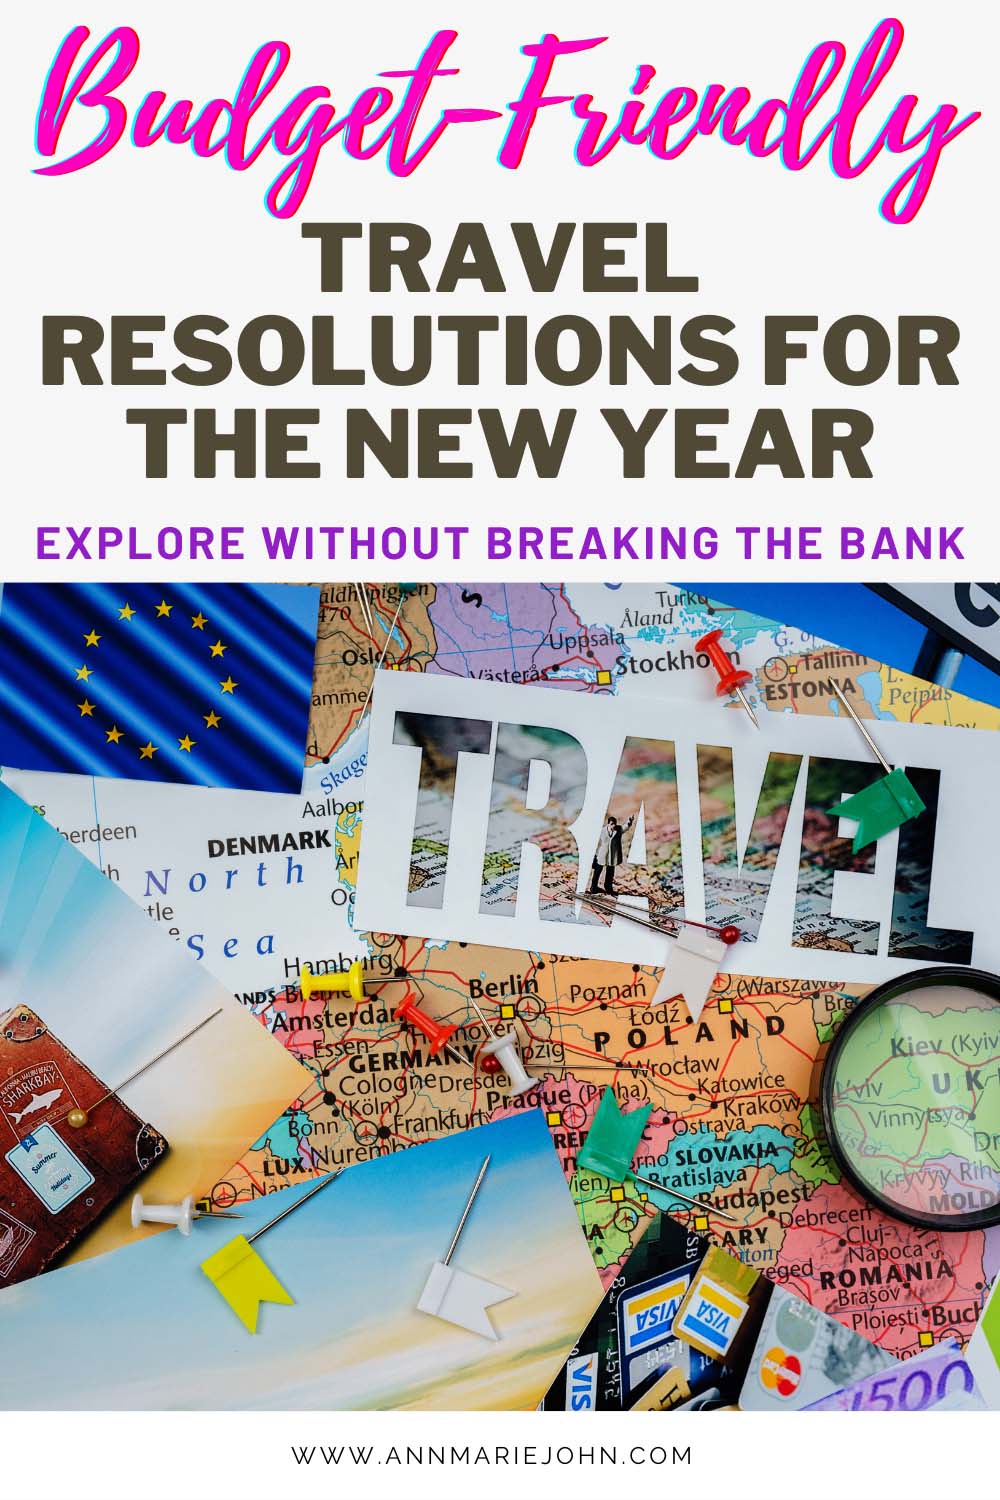 Budget-Friendly Travel Resolutions for the New Year